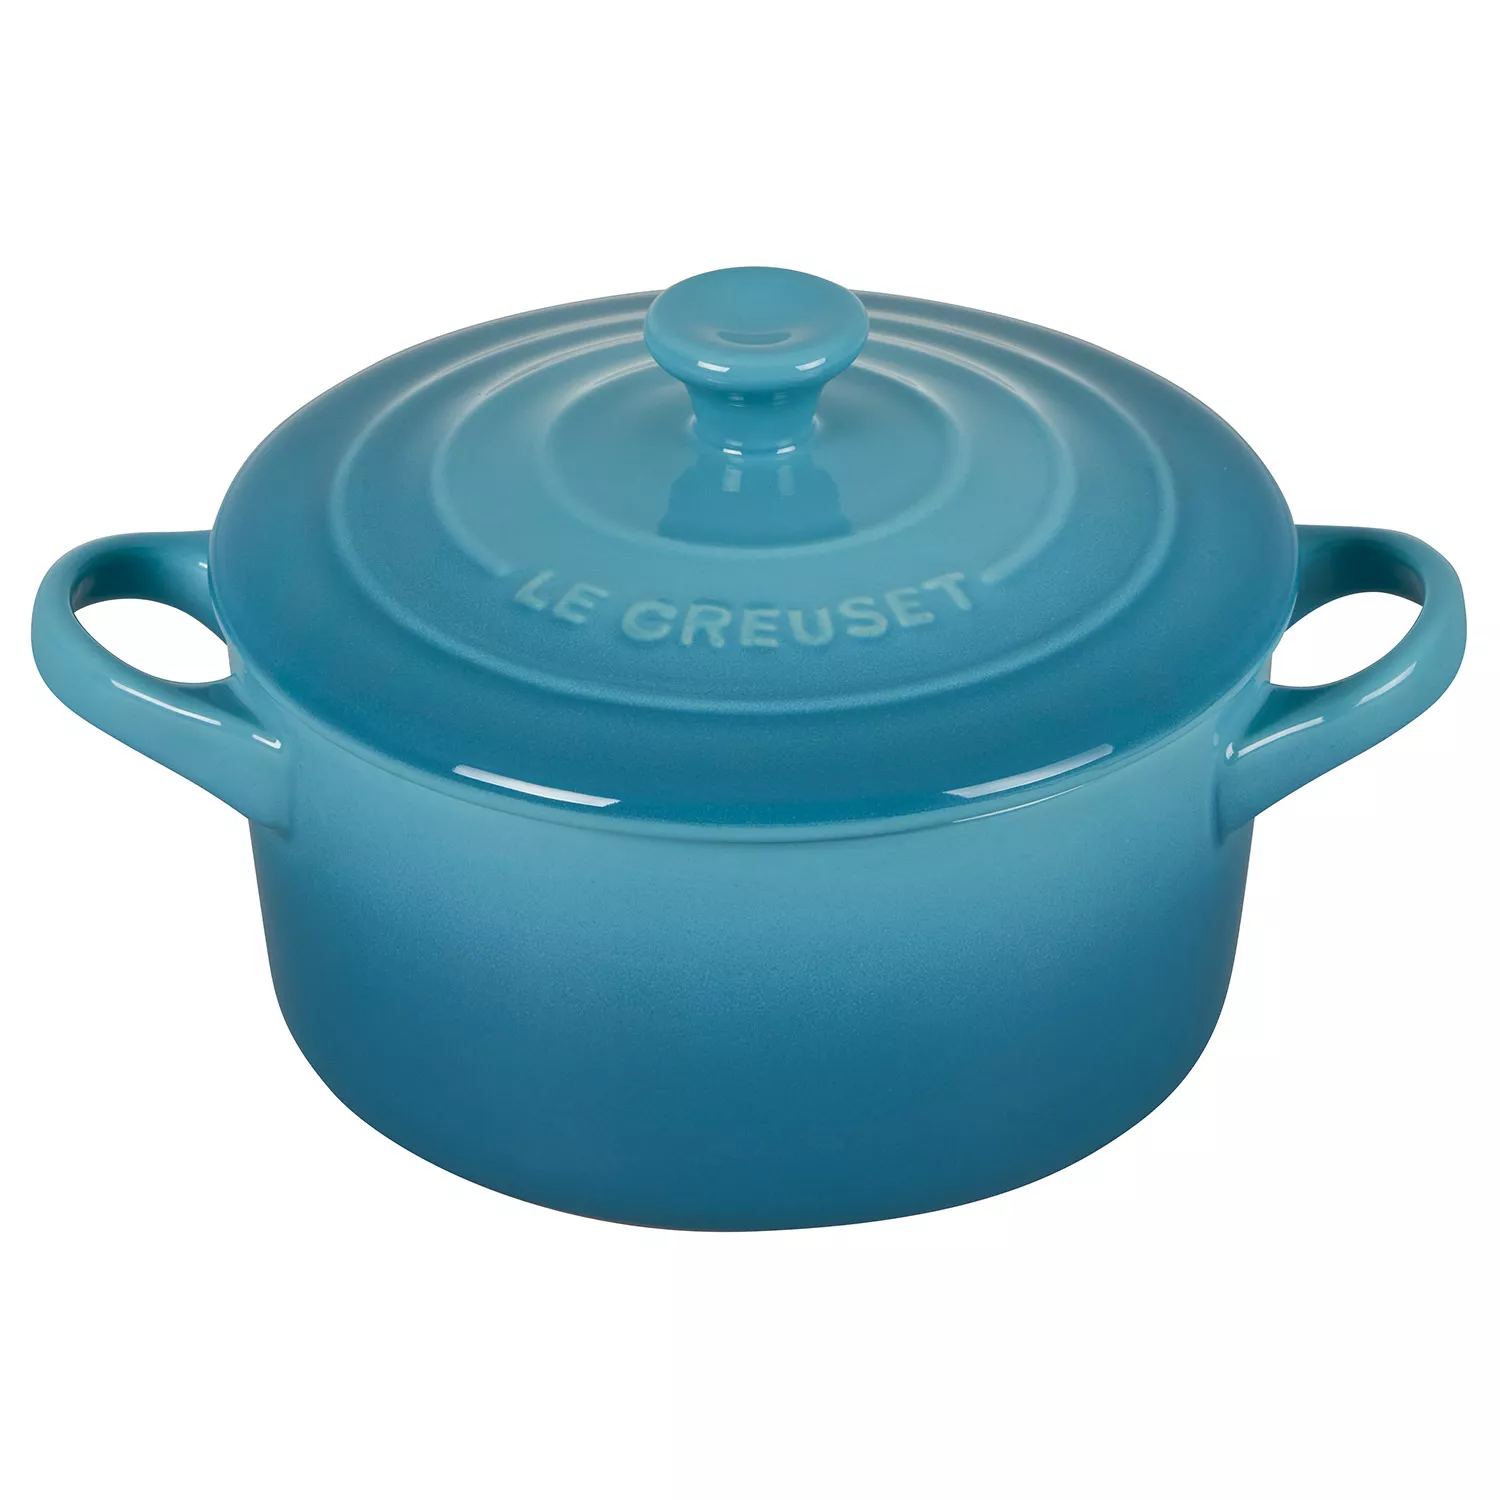 Le Creuset's Noël Collection is pretty perfect and is 20% off